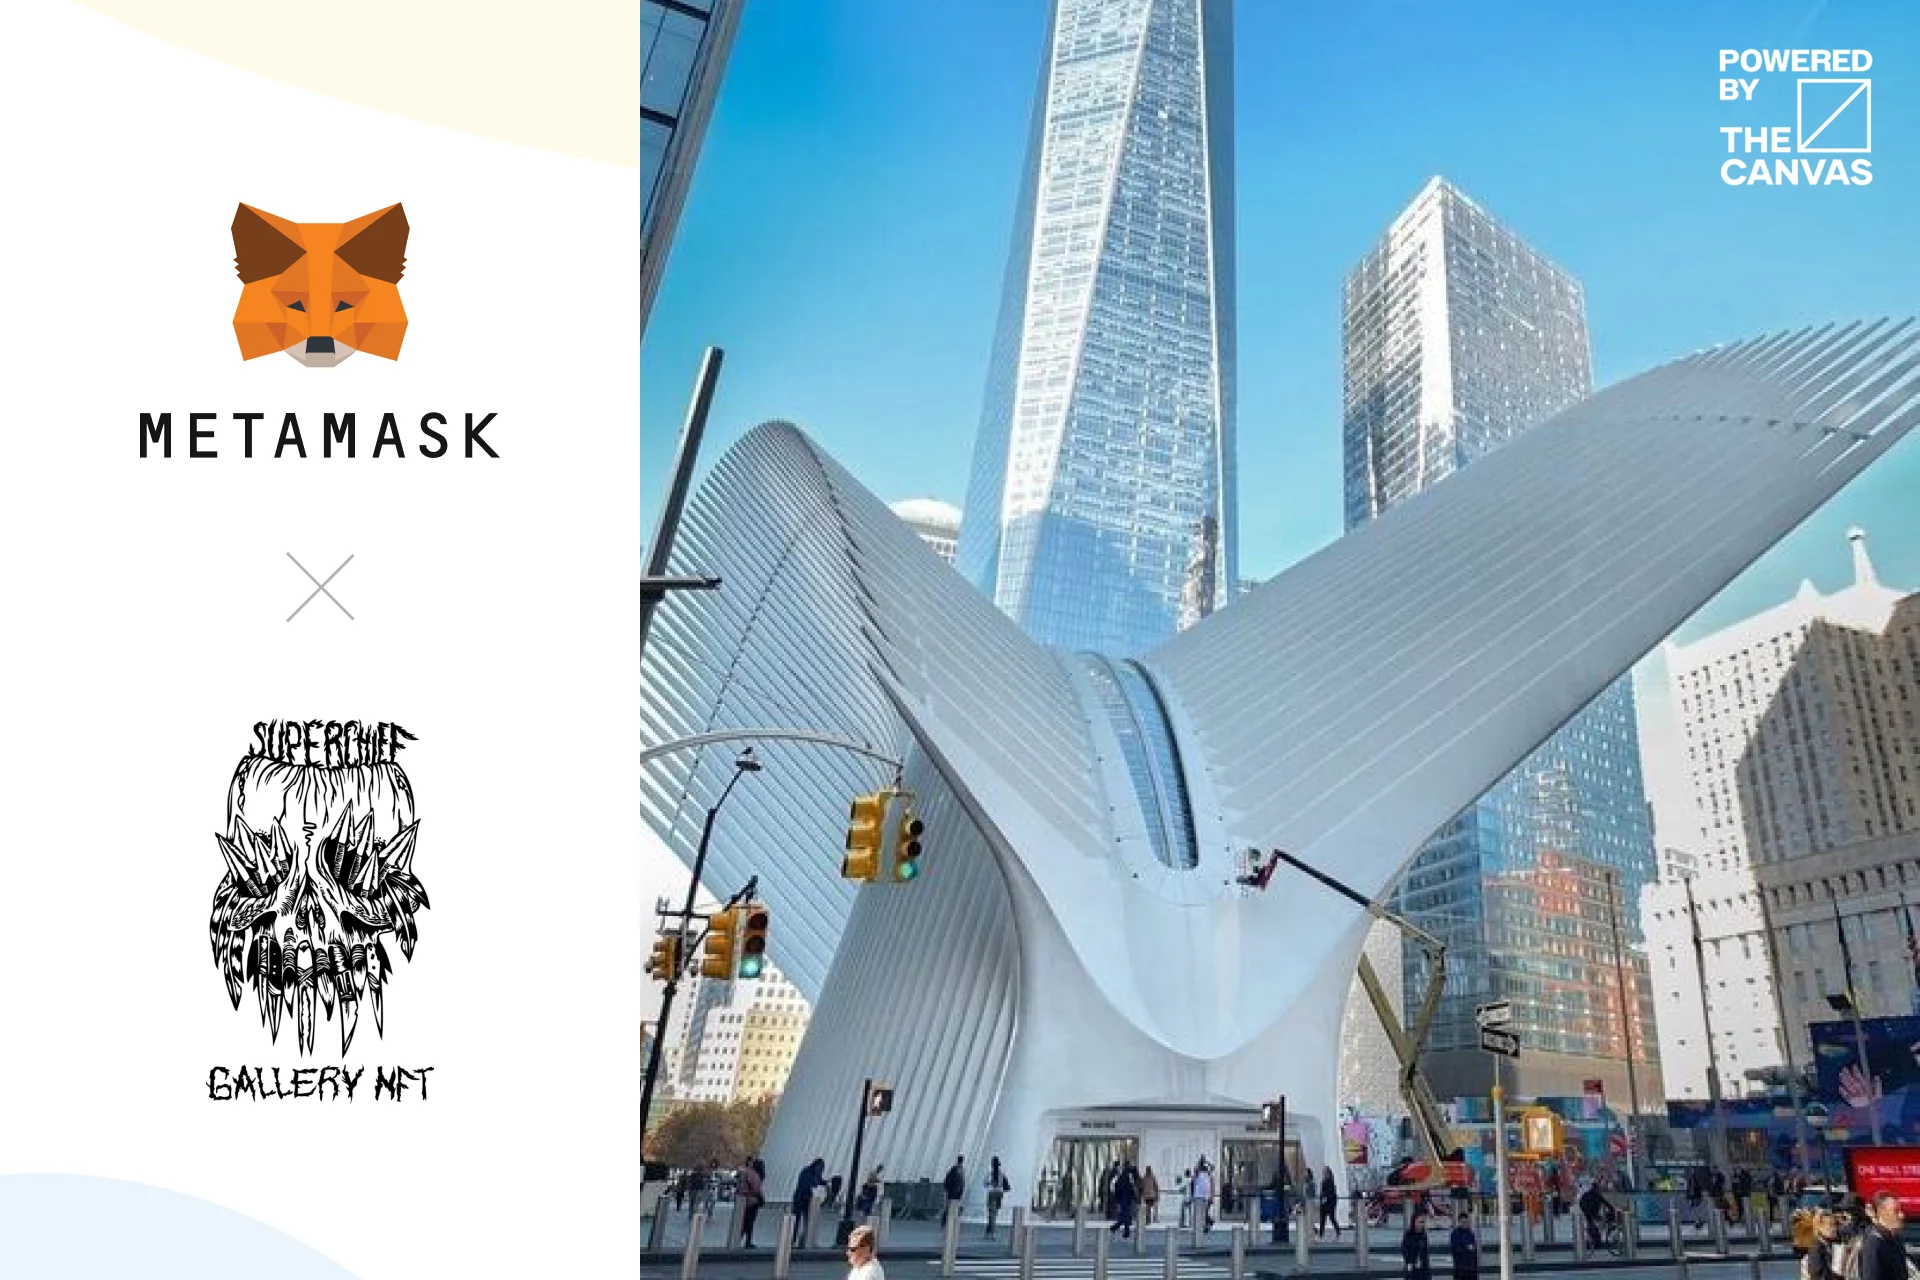 Superchief Gallery NFT & MetaMask Present IRL Web3 Education at The Oculus at Westfield World Trade Center